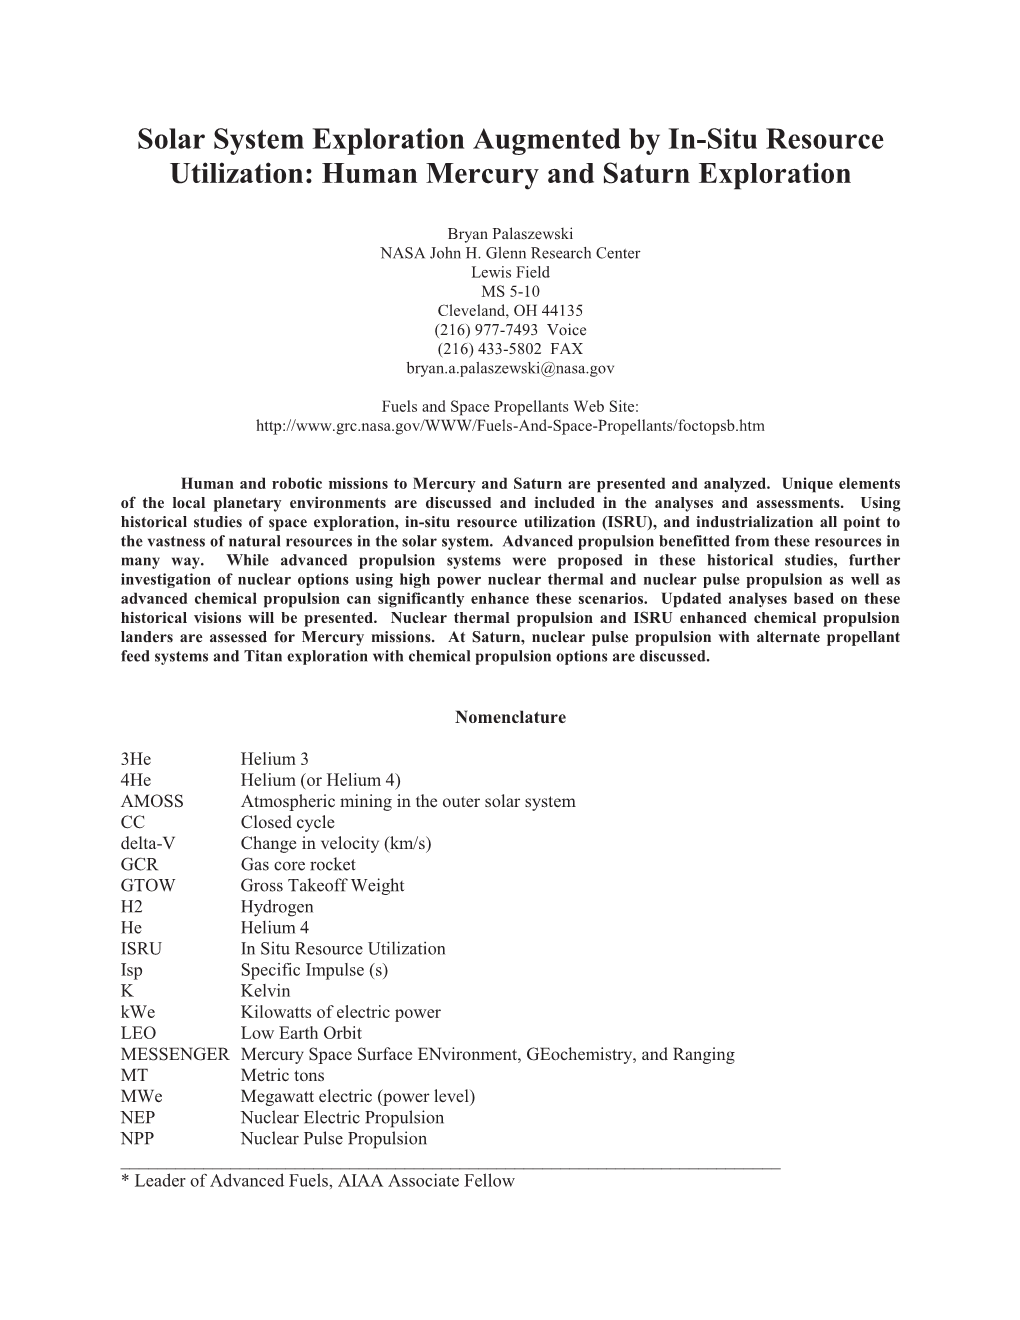 Solar System Exploration Augmented by In-Situ Resource Utilization: Human Mercury and Saturn Exploration